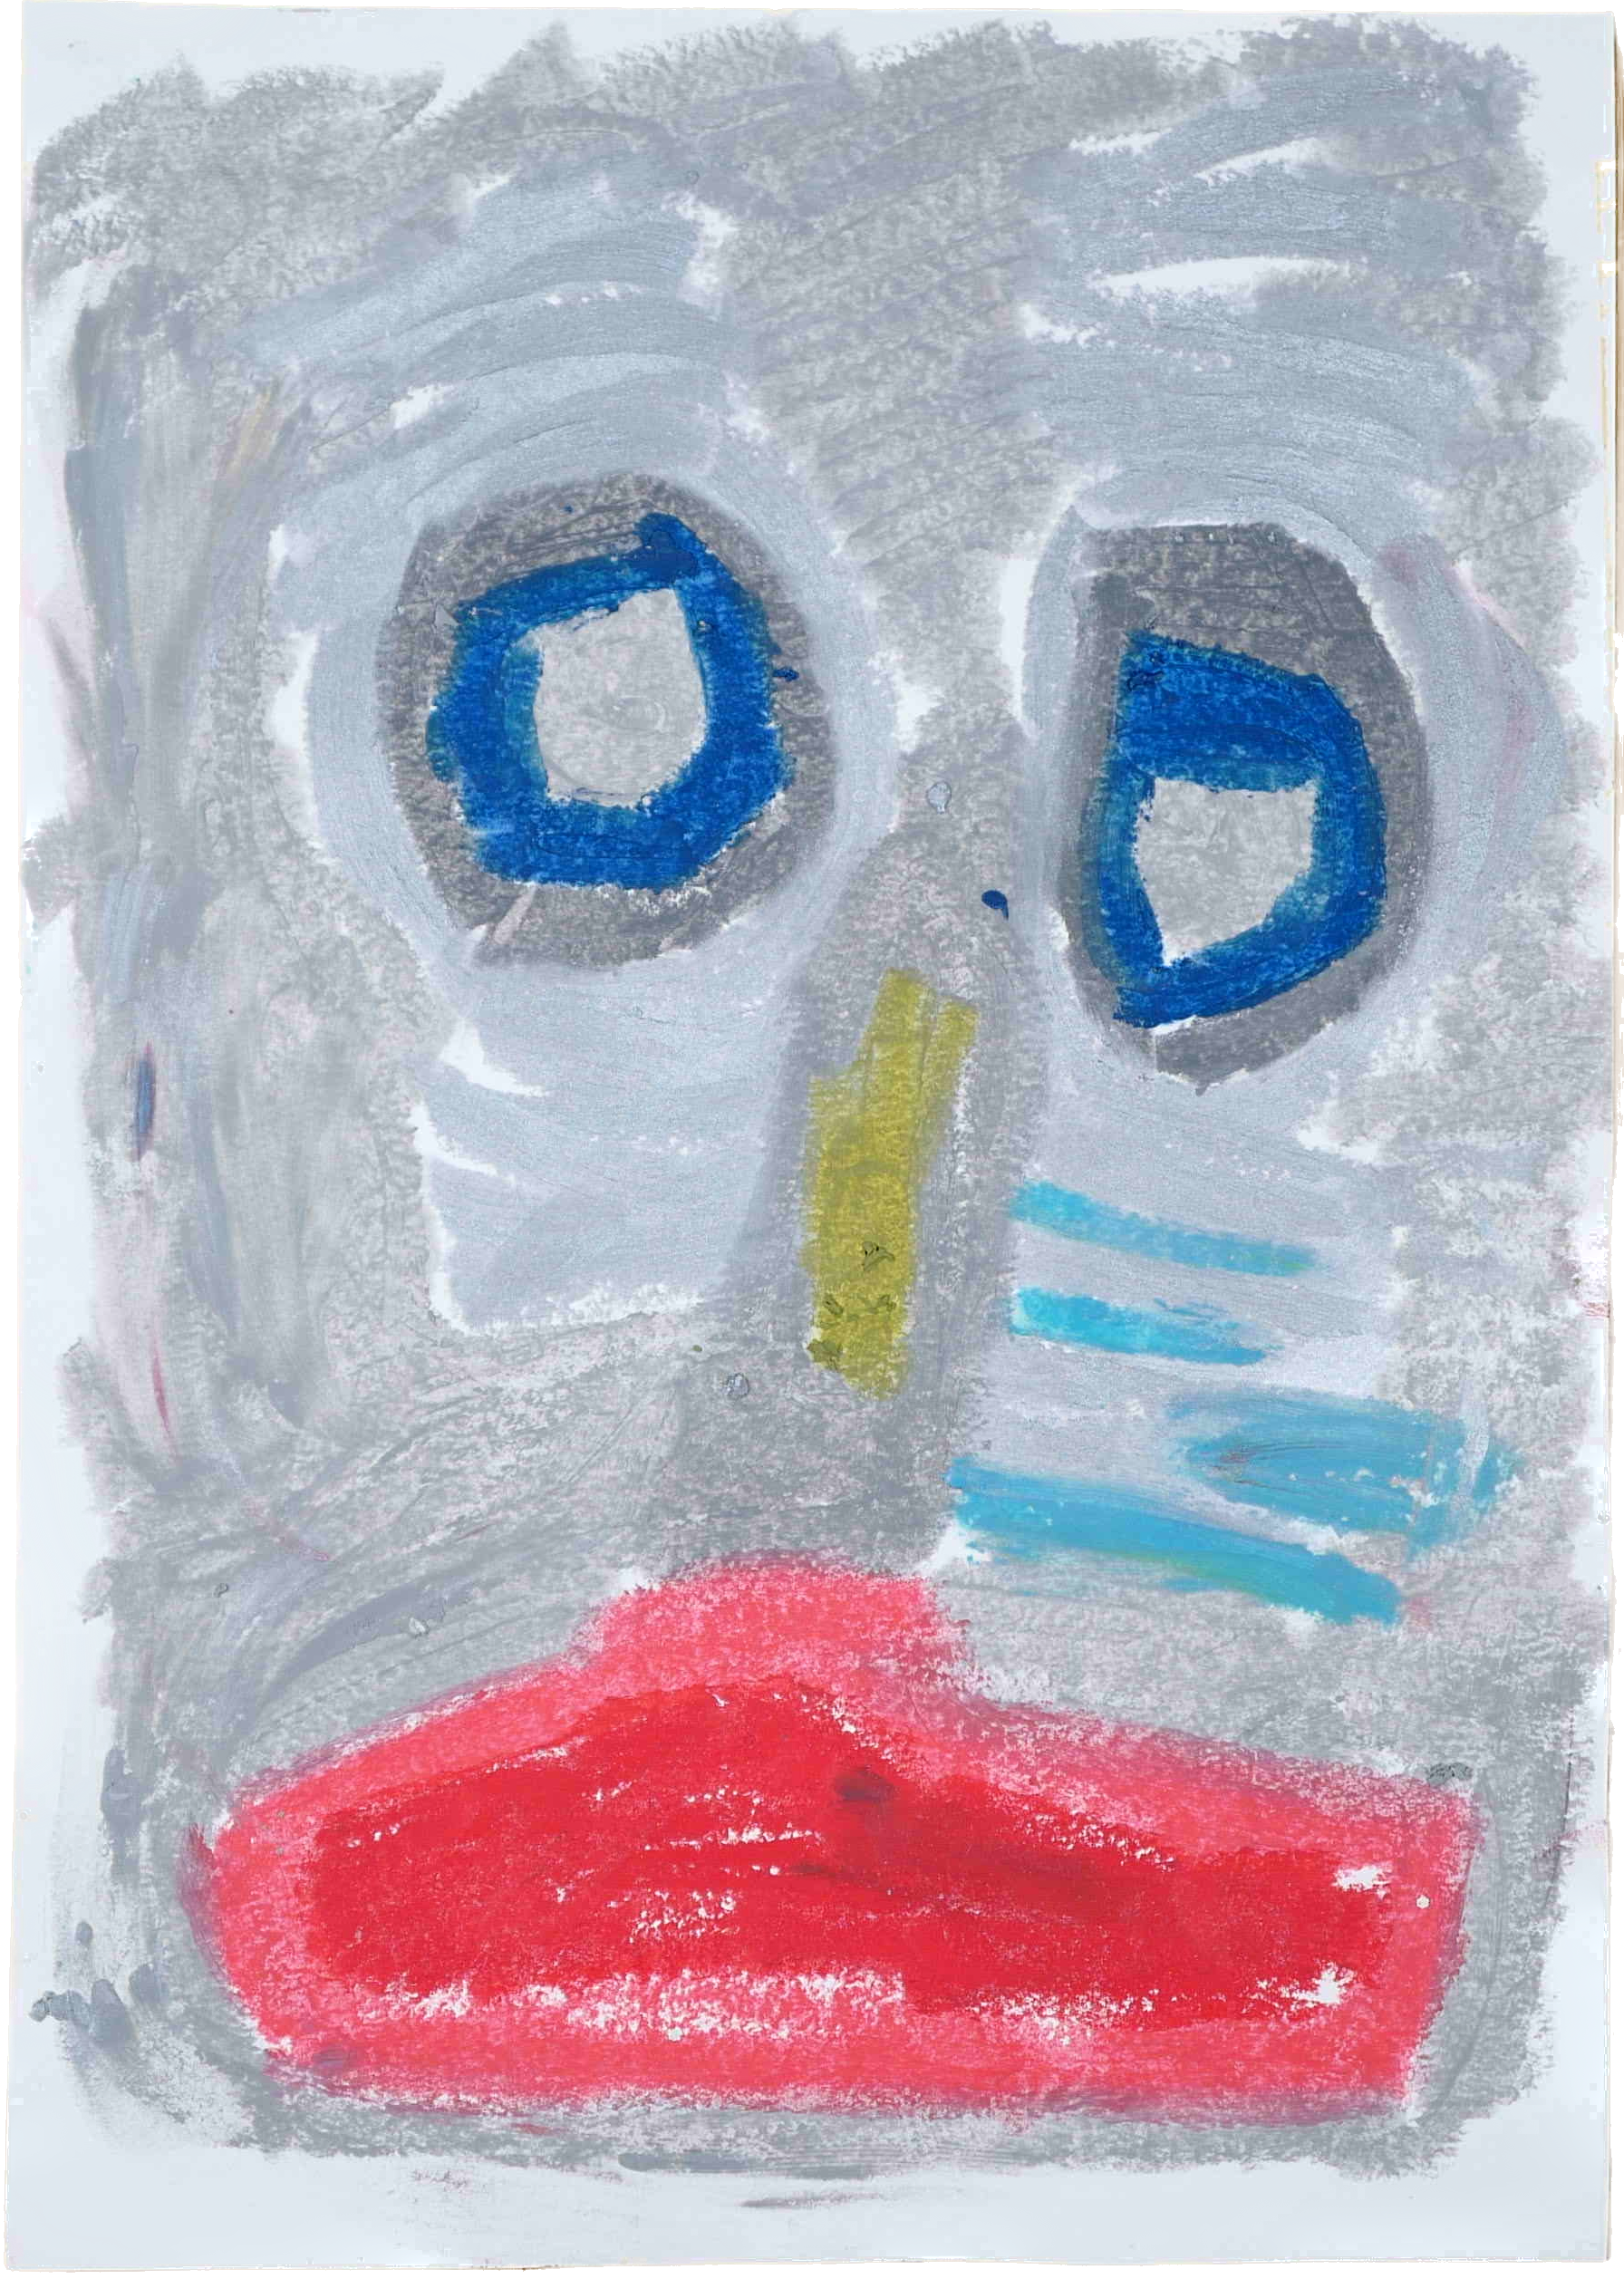 "Lenfantvivant abstract facial expression art" "Sauna Fusion Art with contemplative eyes" "Abstract art with bold red elements" "Museum-quality paper art by Lenfantvivant" "Emotive oil pastel creation in abstract style"